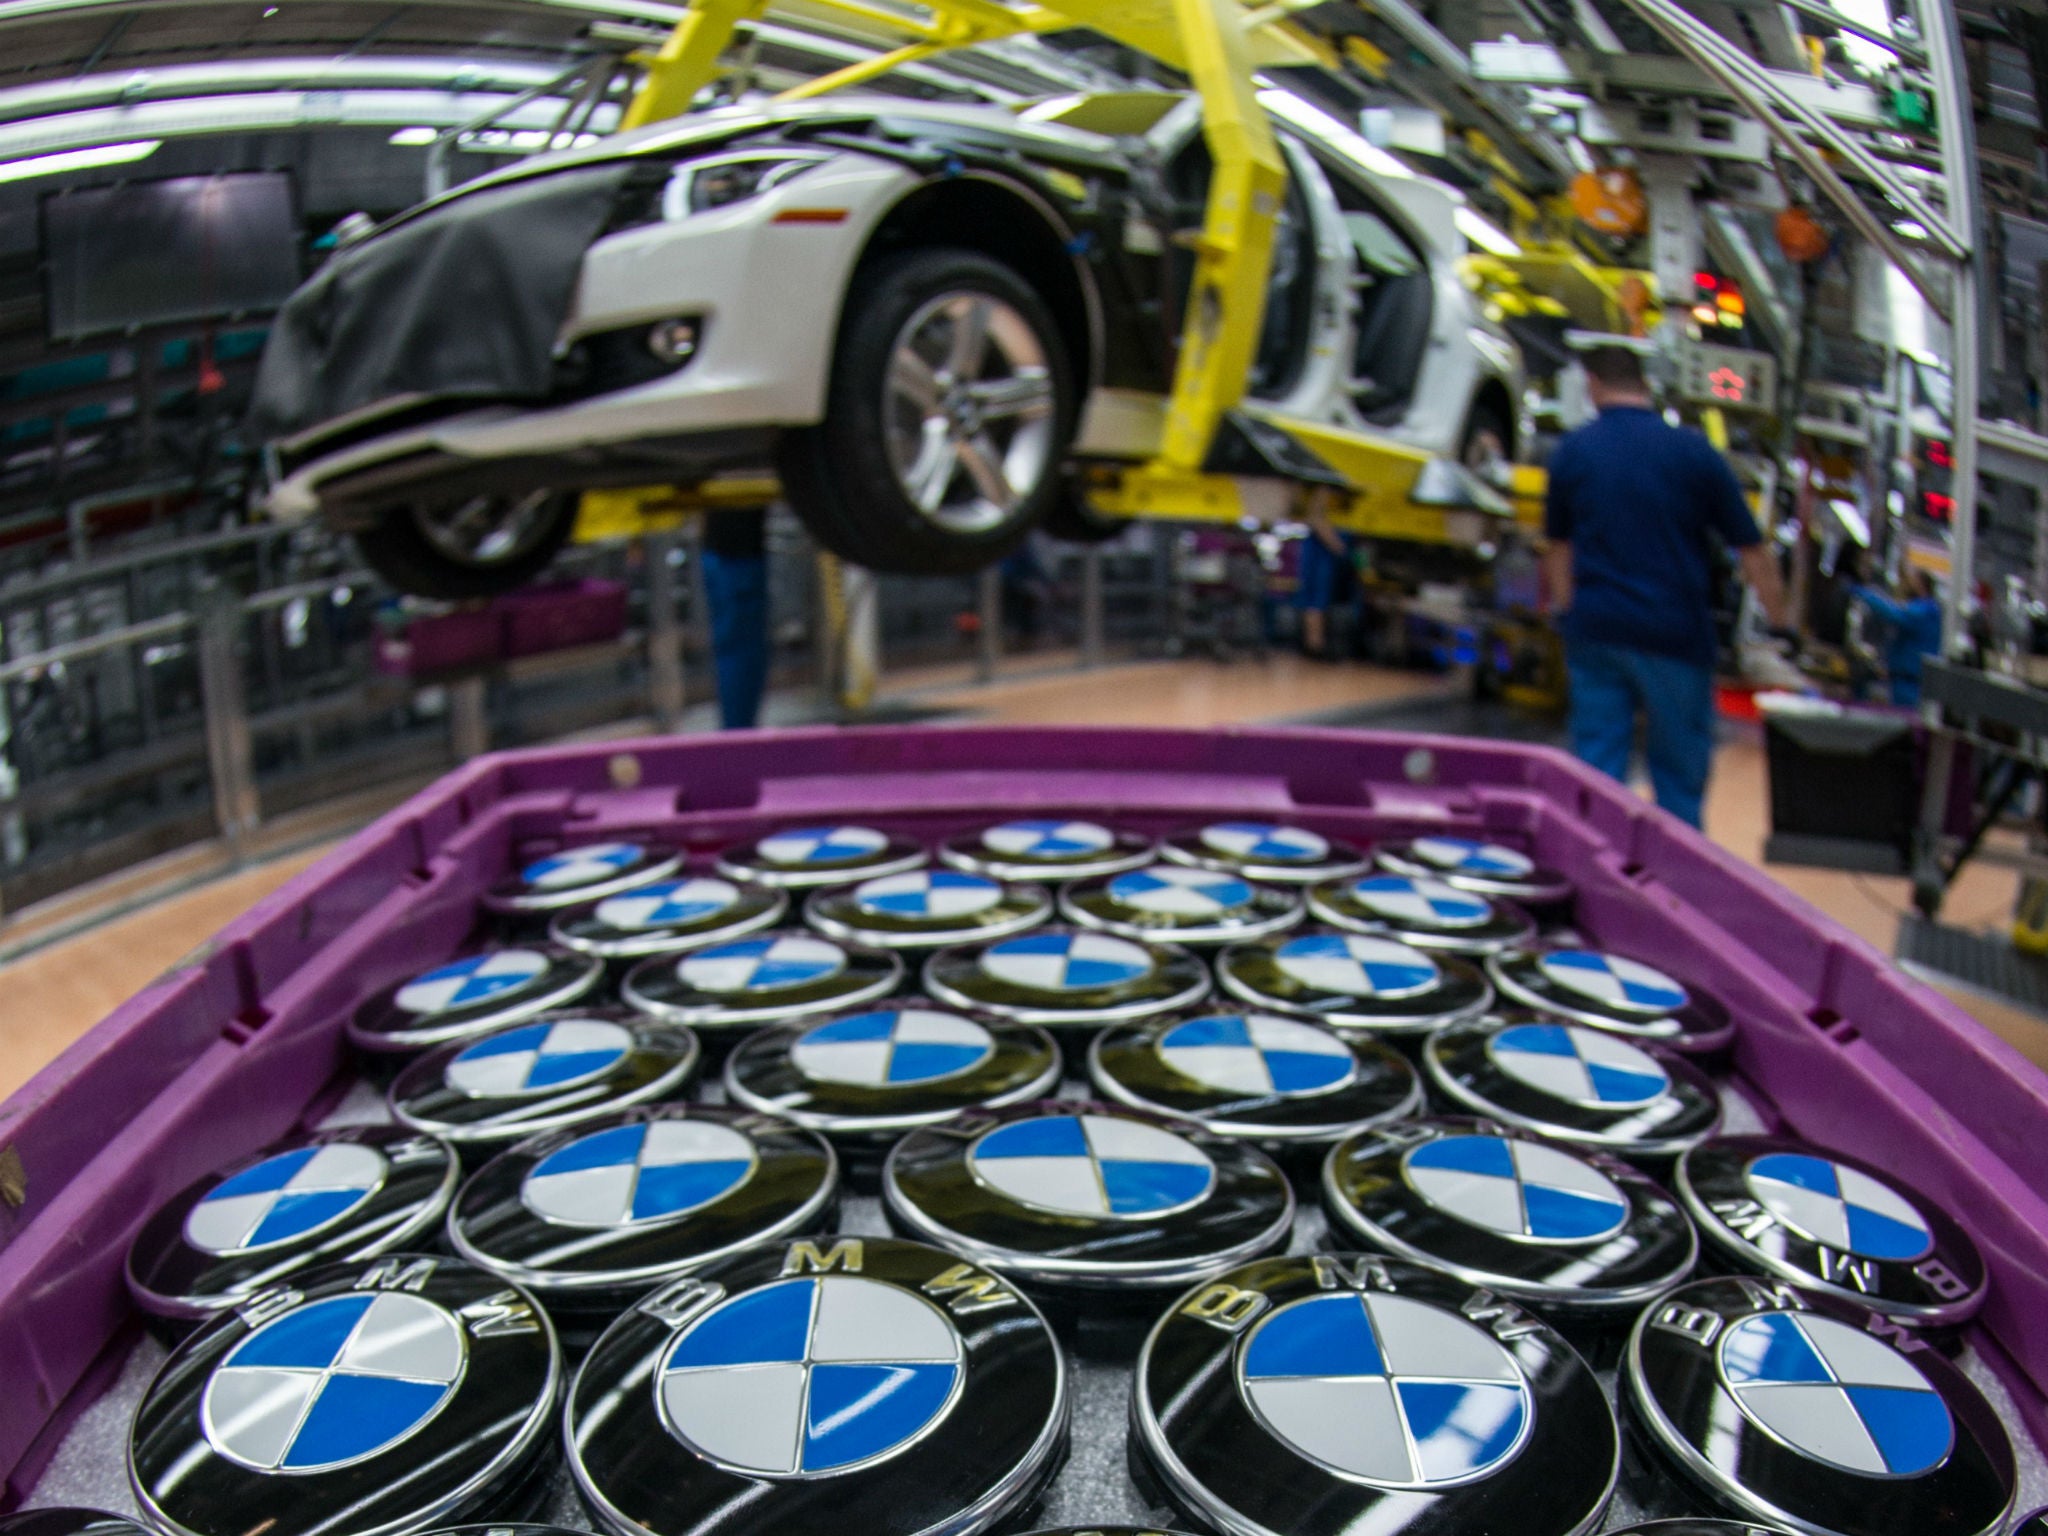 BMW shares fell by more than 5 per cent after magazine claims